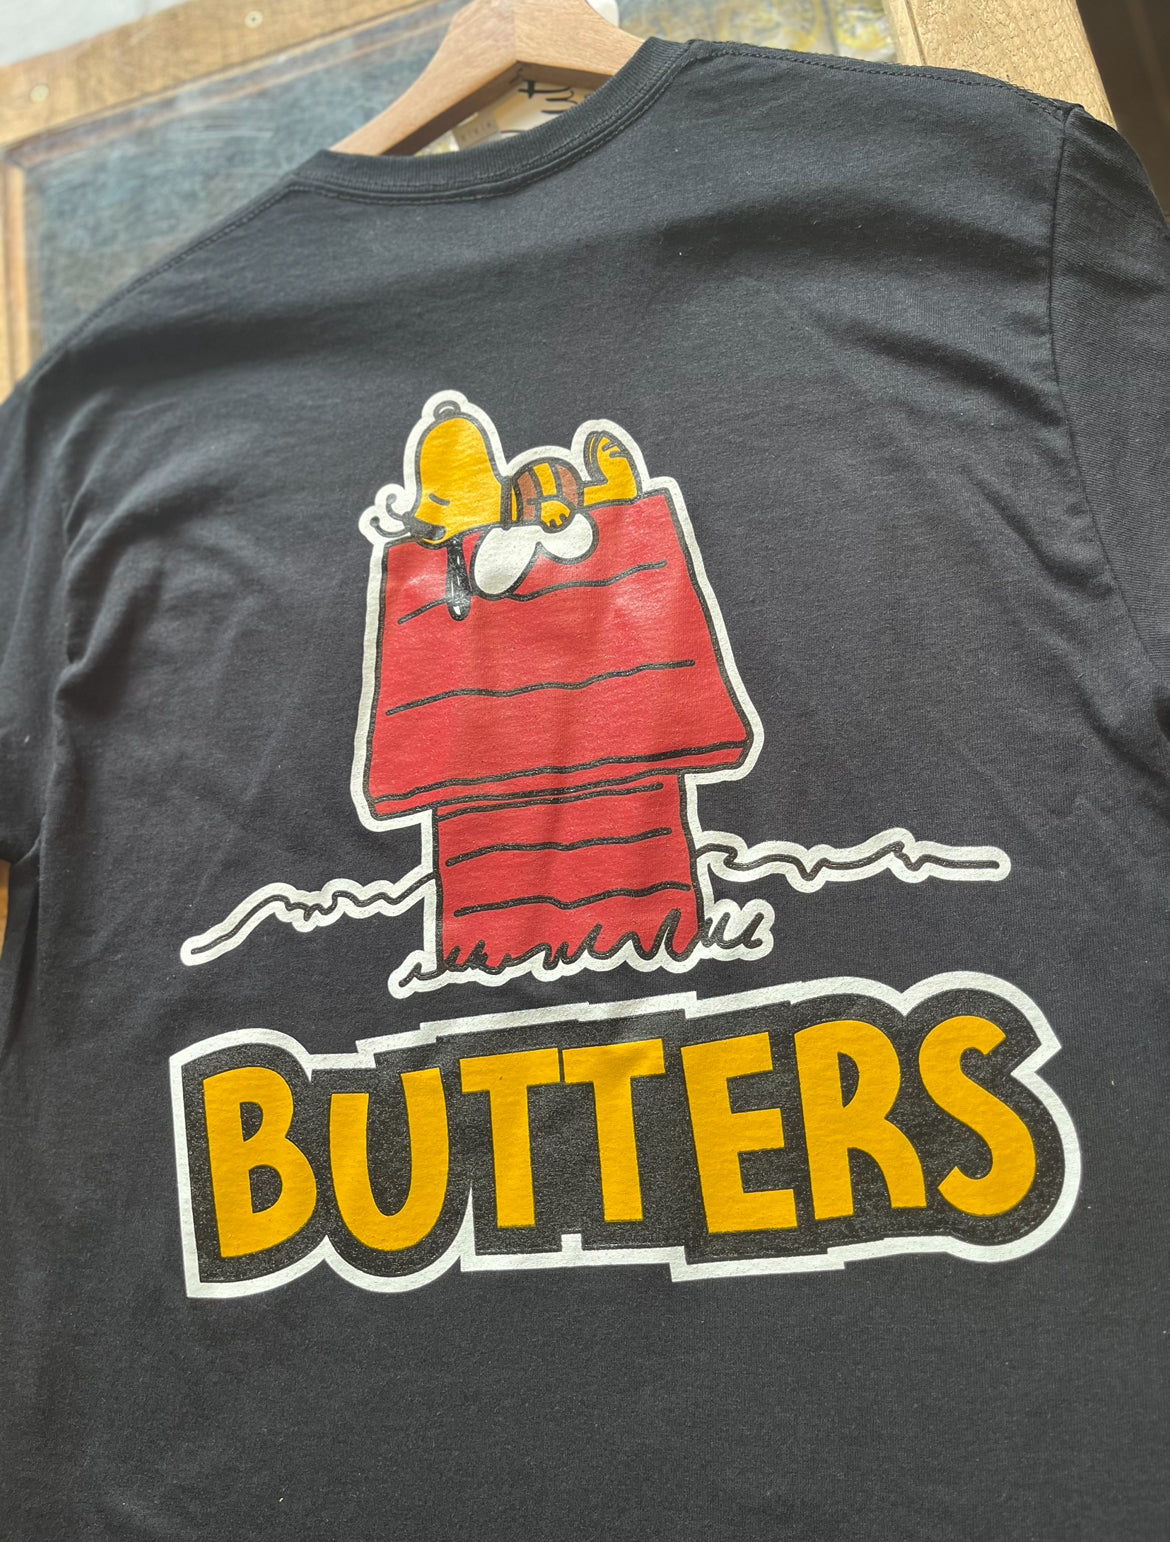 Butters Snoopy Black Tee